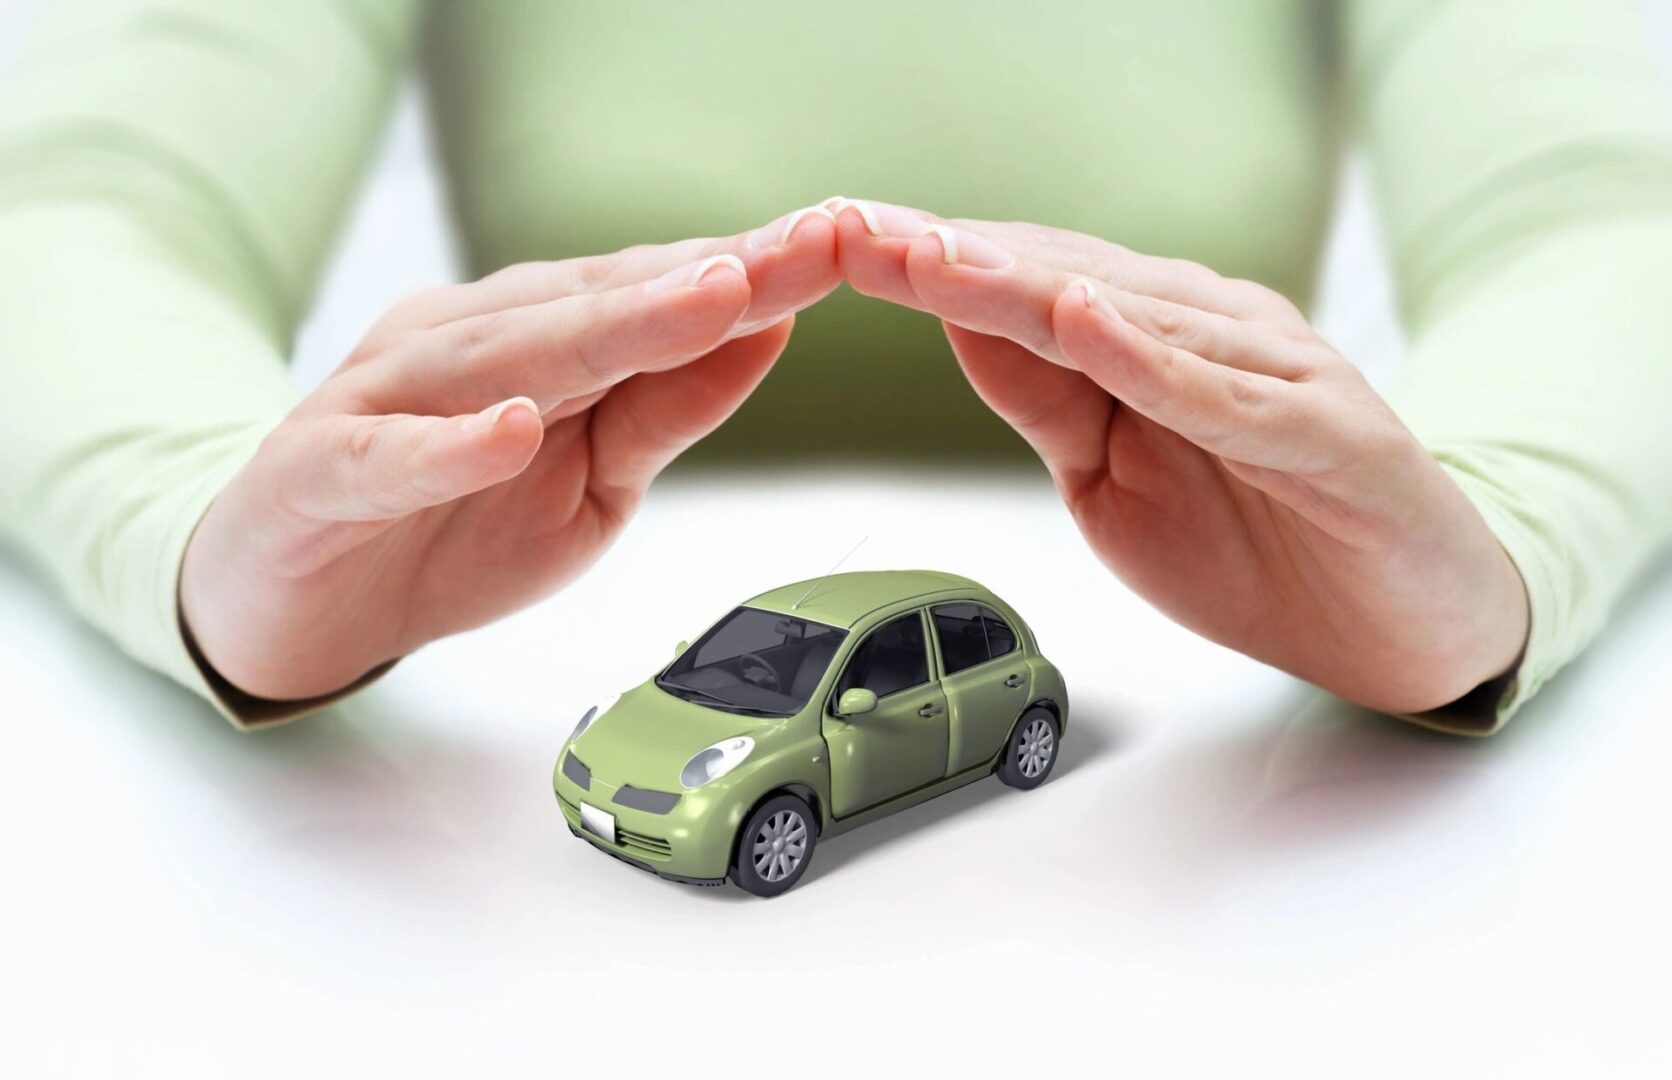 Small green car under a pair of hands